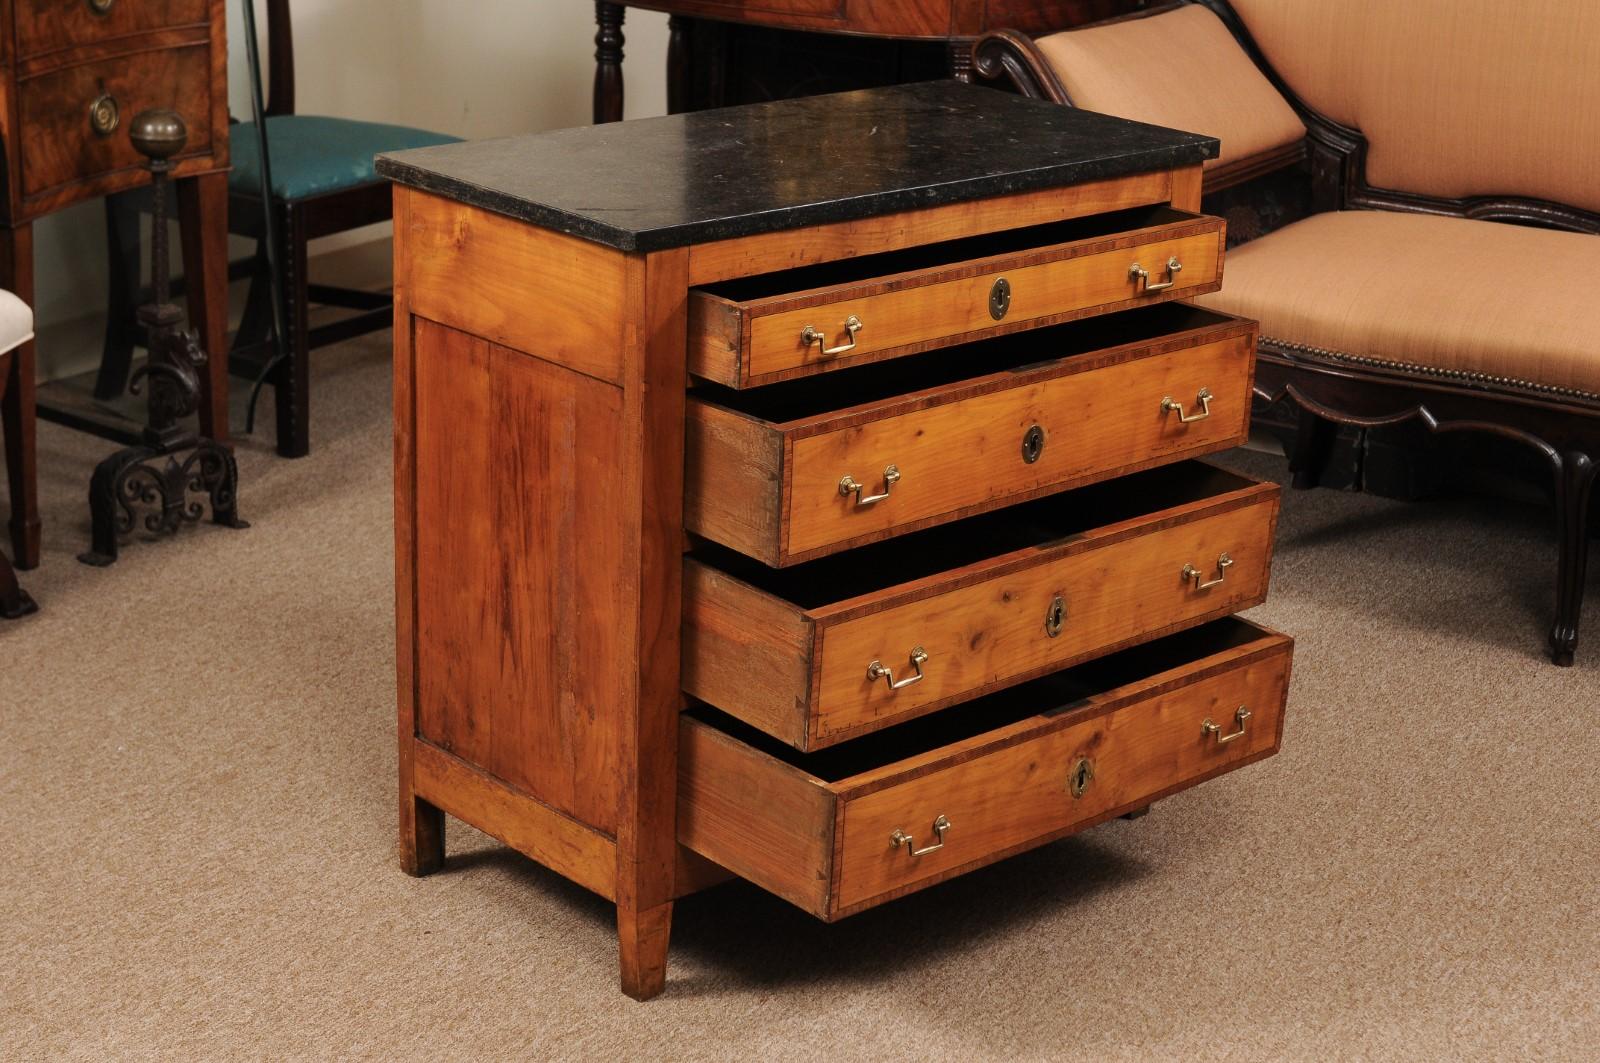 The neoclassical style petite Italian fruitwood commode with black marble top, 4 drawers with inlay/cross-banding and brass pulls terminating in tapered feet.

